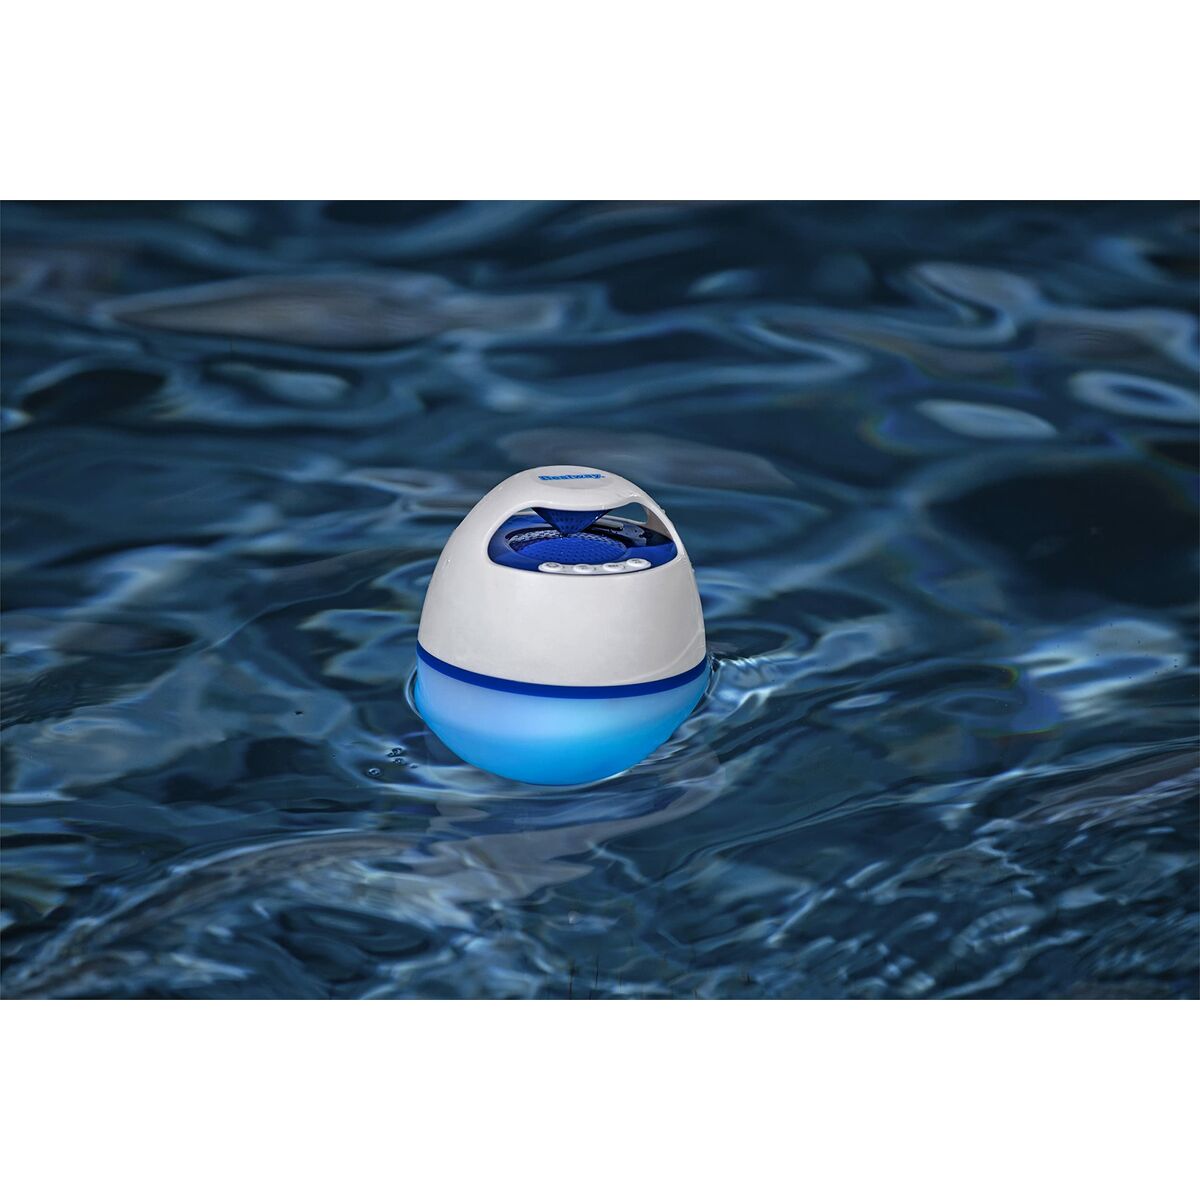 Floating Wireless Speaker with LED Bestway White 6 W, Bestway, Electronics, Mobile communication and accessories, floating-wireless-speaker-with-led-bestway-white-6-w, Brand_Bestway, category-reference-2609, category-reference-2882, category-reference-2923, category-reference-t-19653, category-reference-t-21311, category-reference-t-25527, category-reference-t-4036, category-reference-t-4037, Condition_NEW, entertainment, music, Price_50 - 100, telephones & tablets, wifi y bluetooth, RiotNook